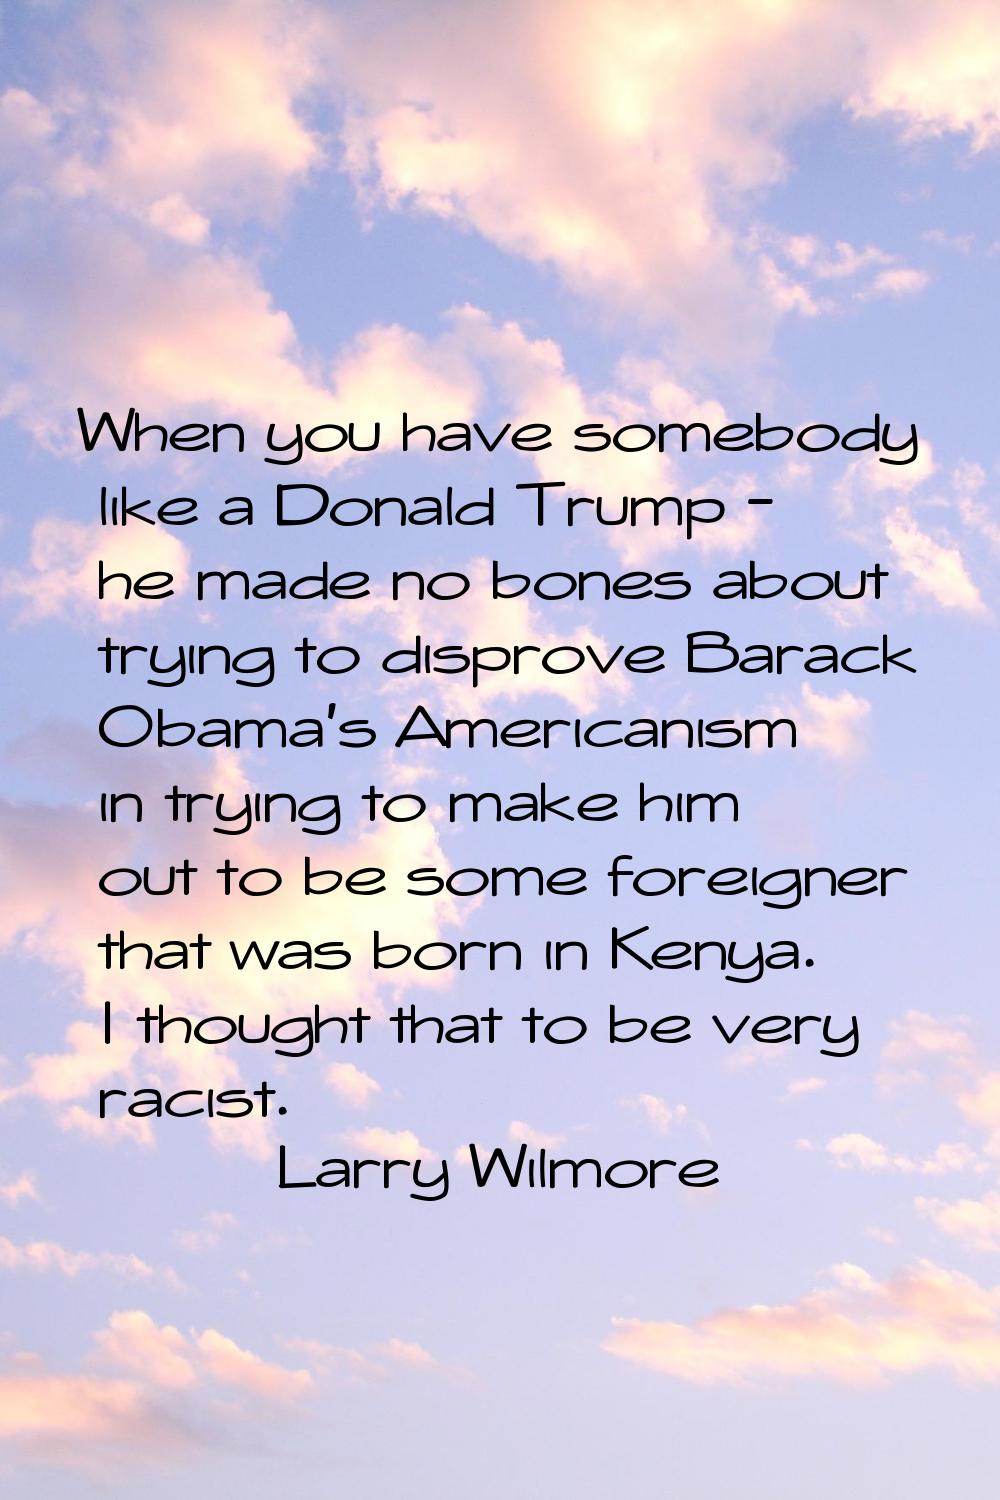 When you have somebody like a Donald Trump - he made no bones about trying to disprove Barack Obama